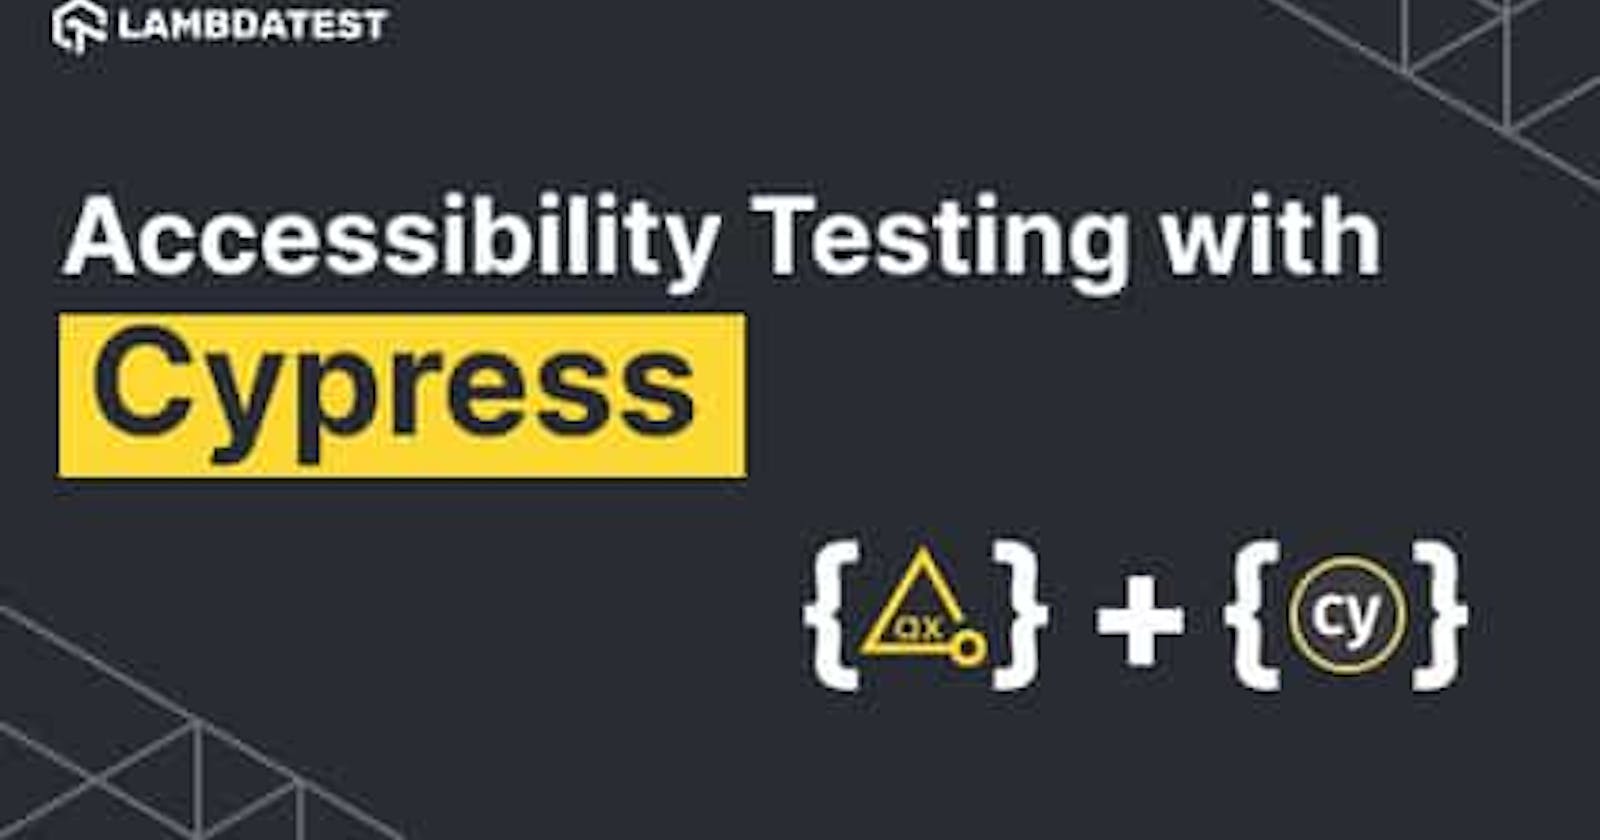 How To Perform Cypress Accessibility Testing